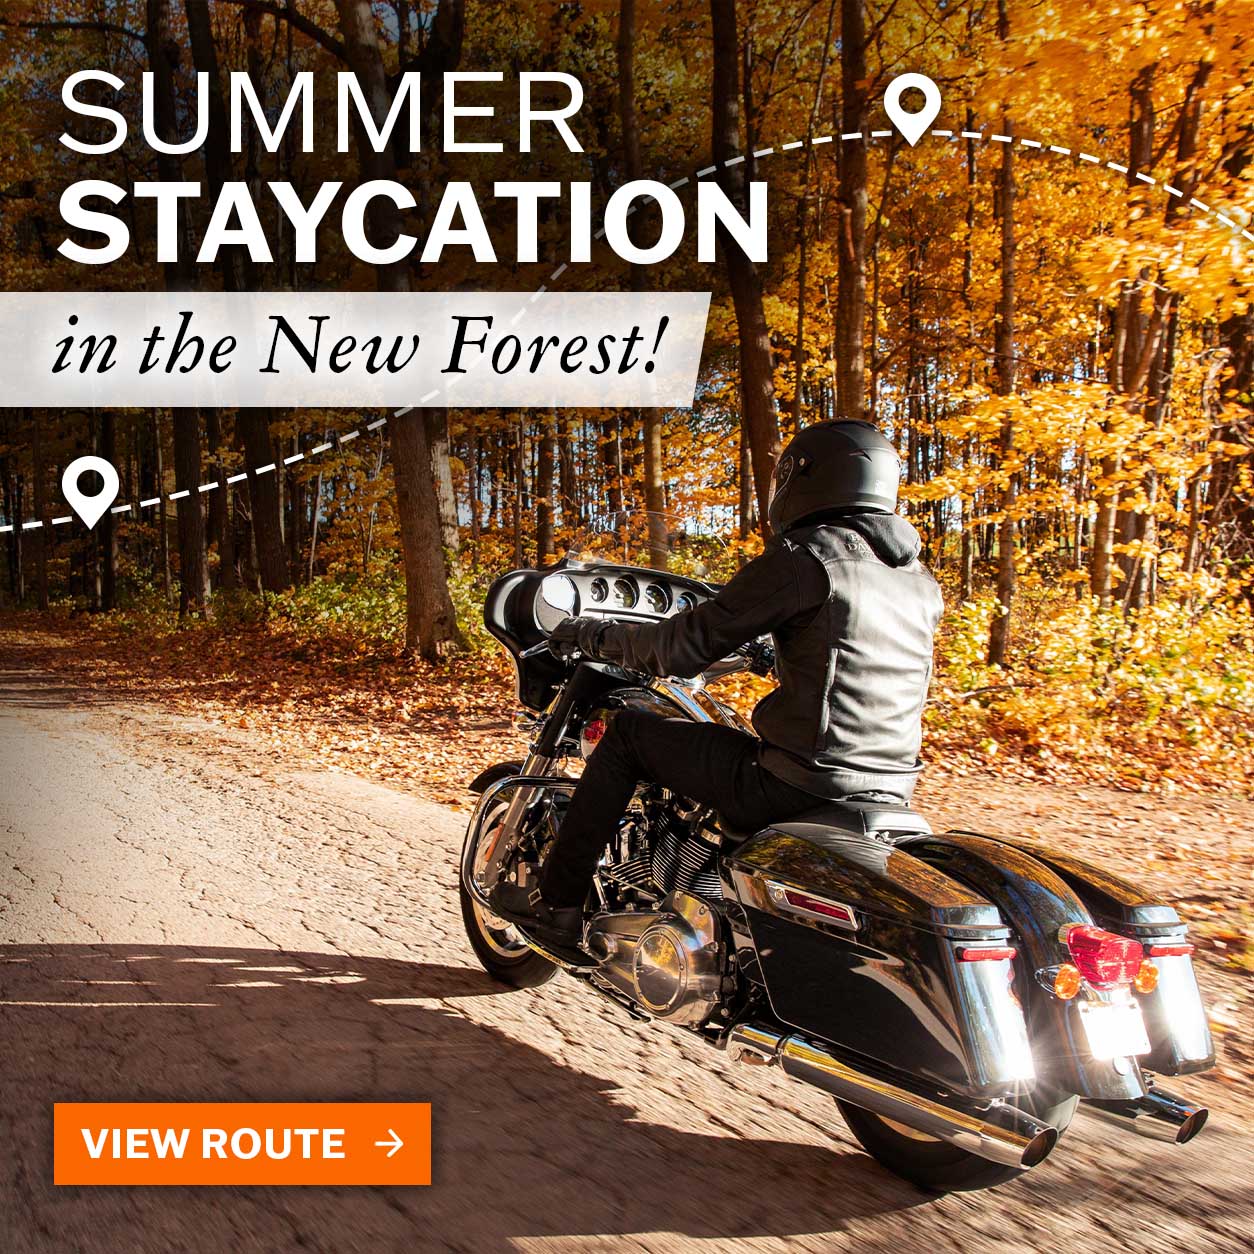 Maidstone Harley-Davidson Summer Staycation New Forest Ride Route